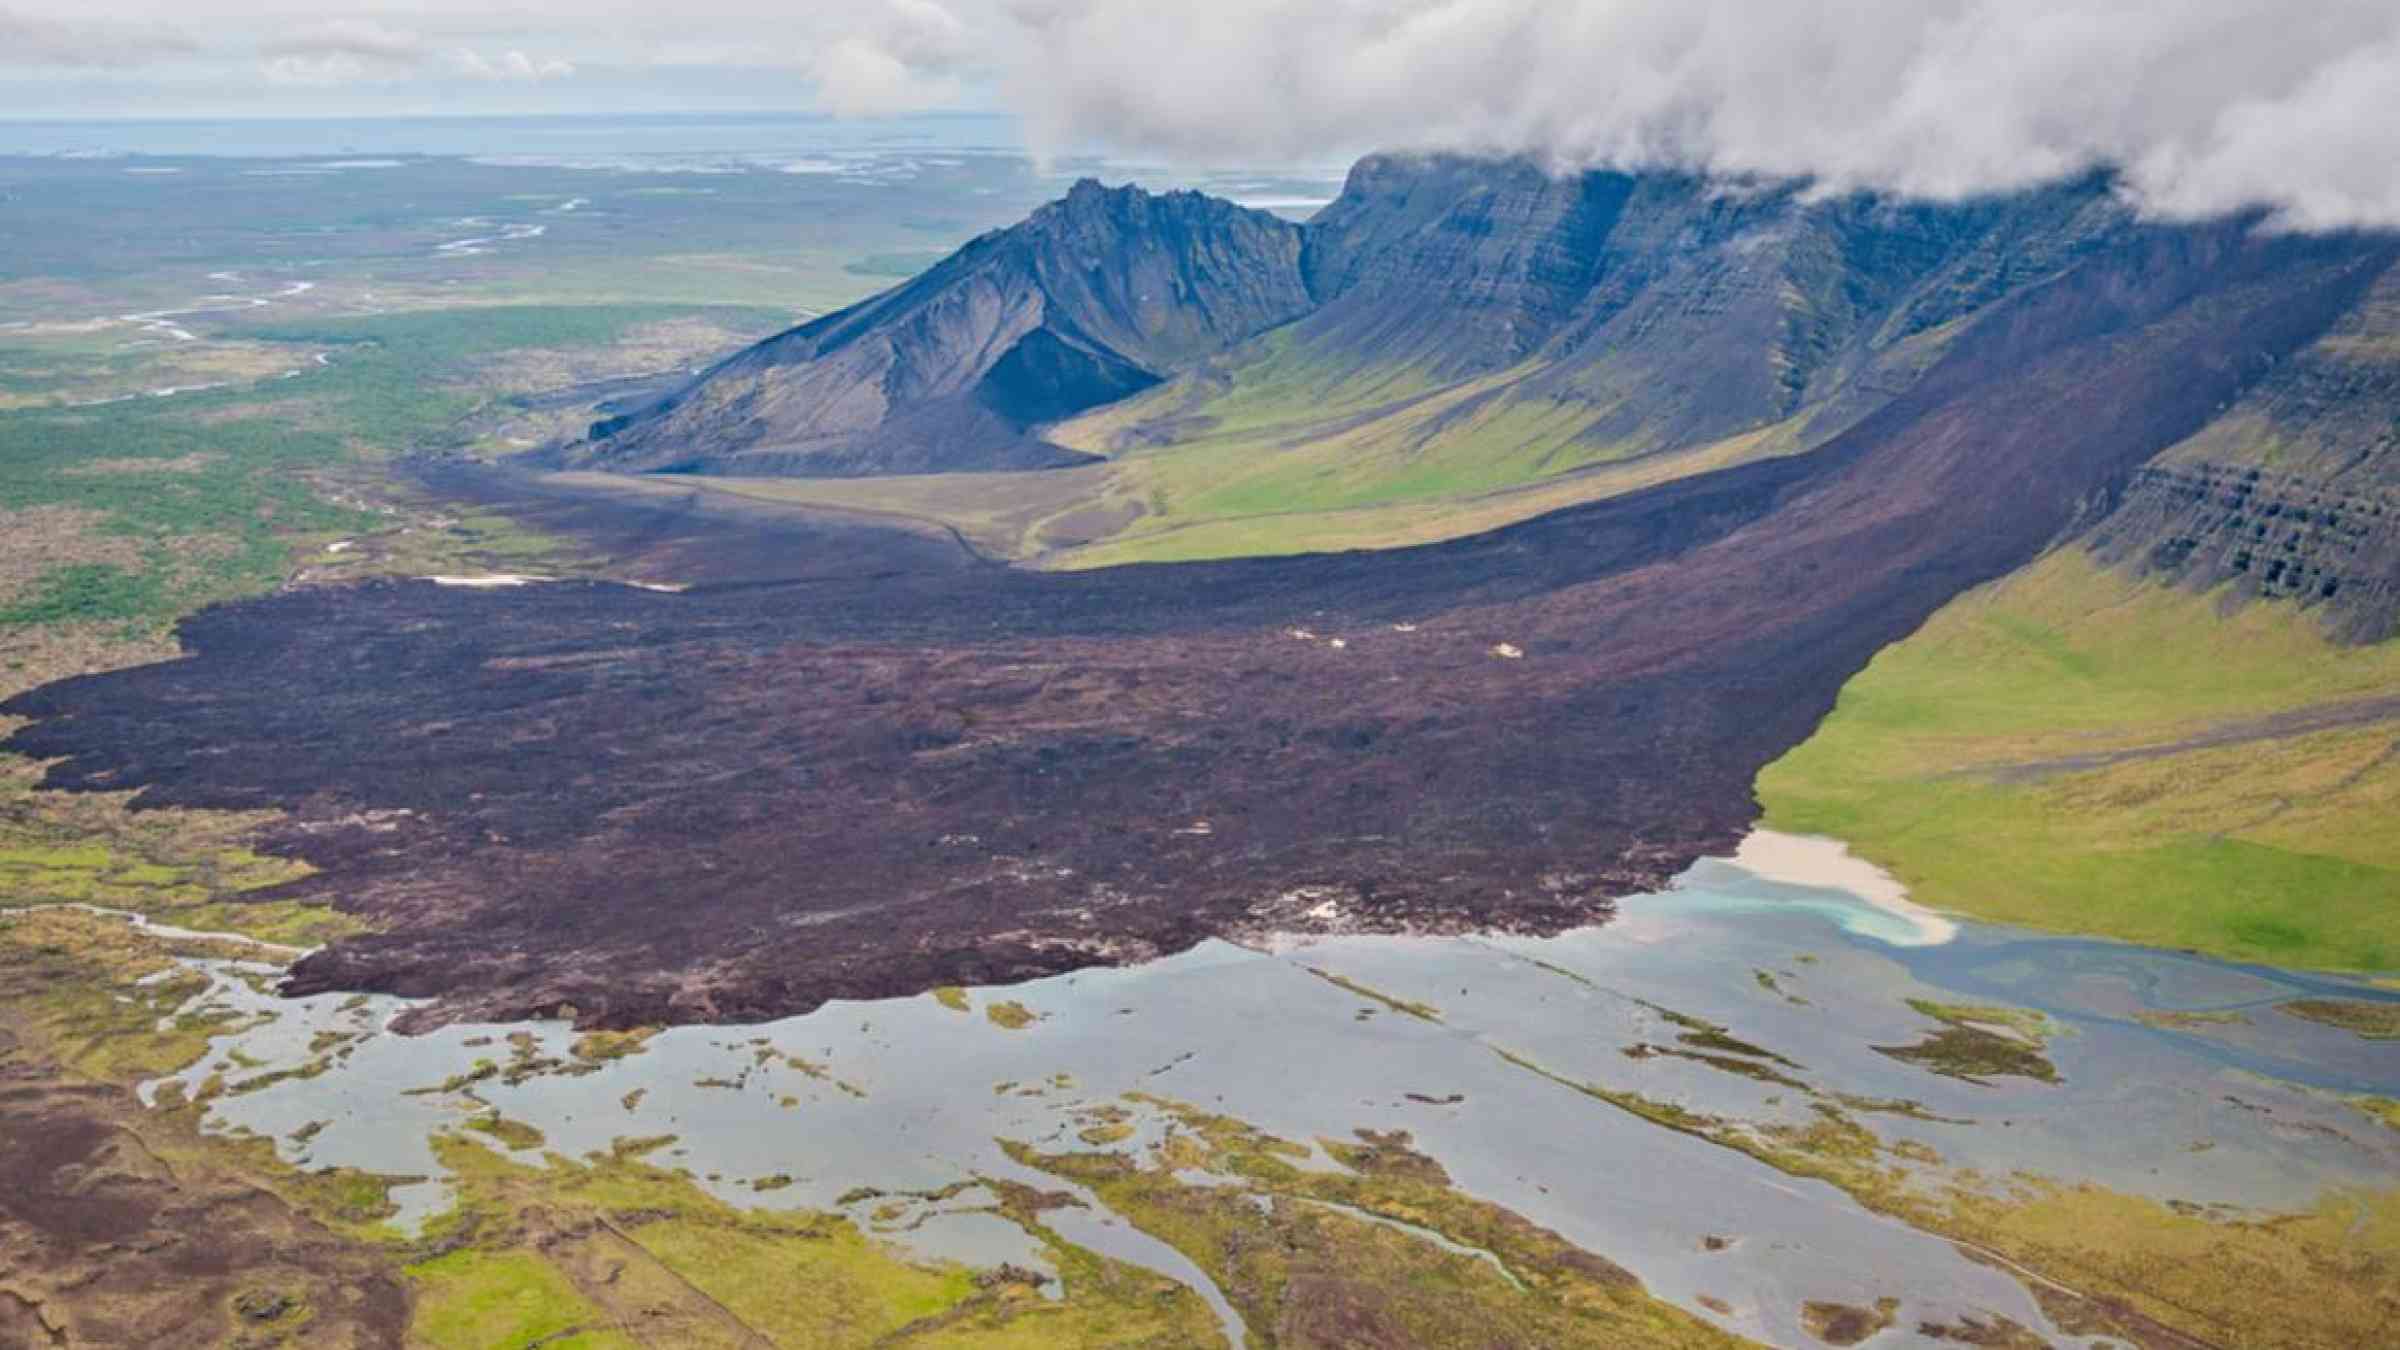 The impact of a landslide in the Hítardalur valley, Iceland in 2018. Miks Mihails Ignats/Shutterstock